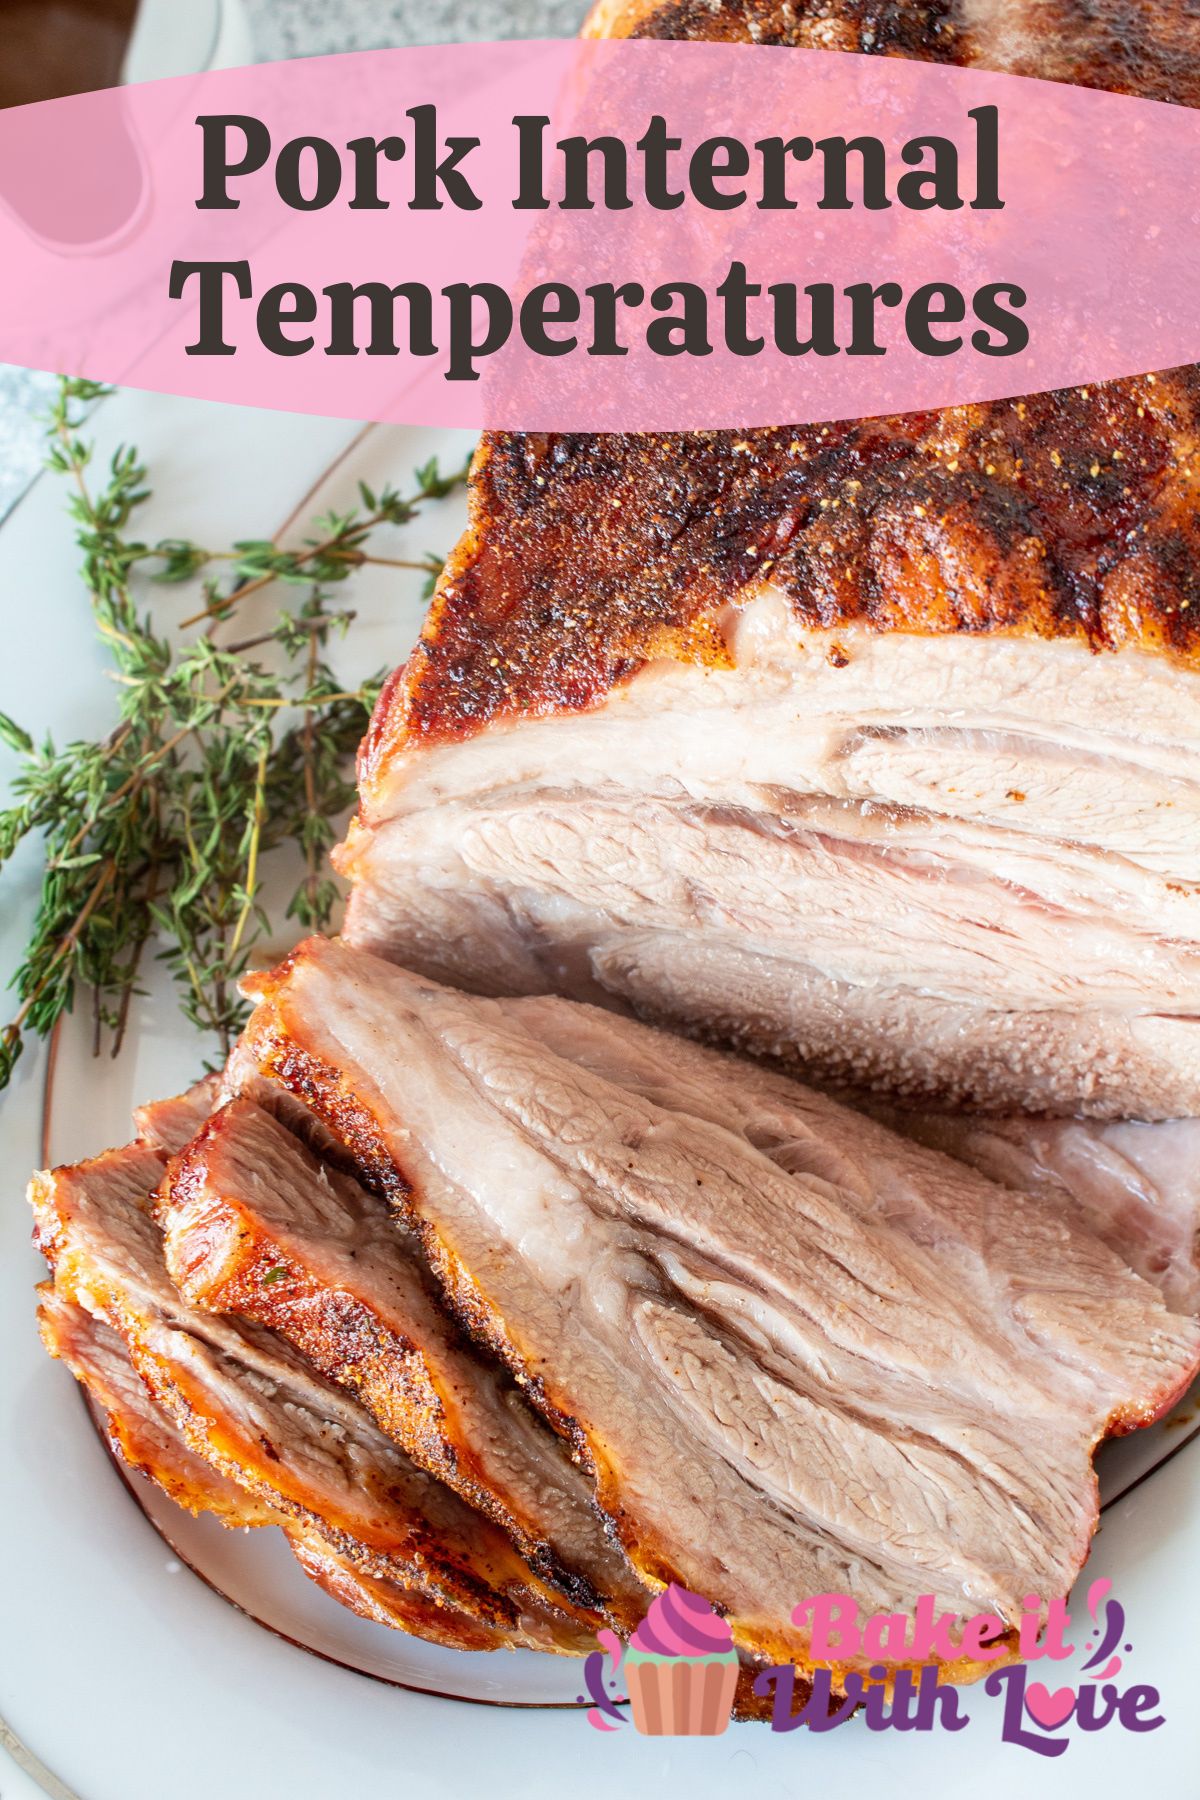 Pin image with text showing pork roast.